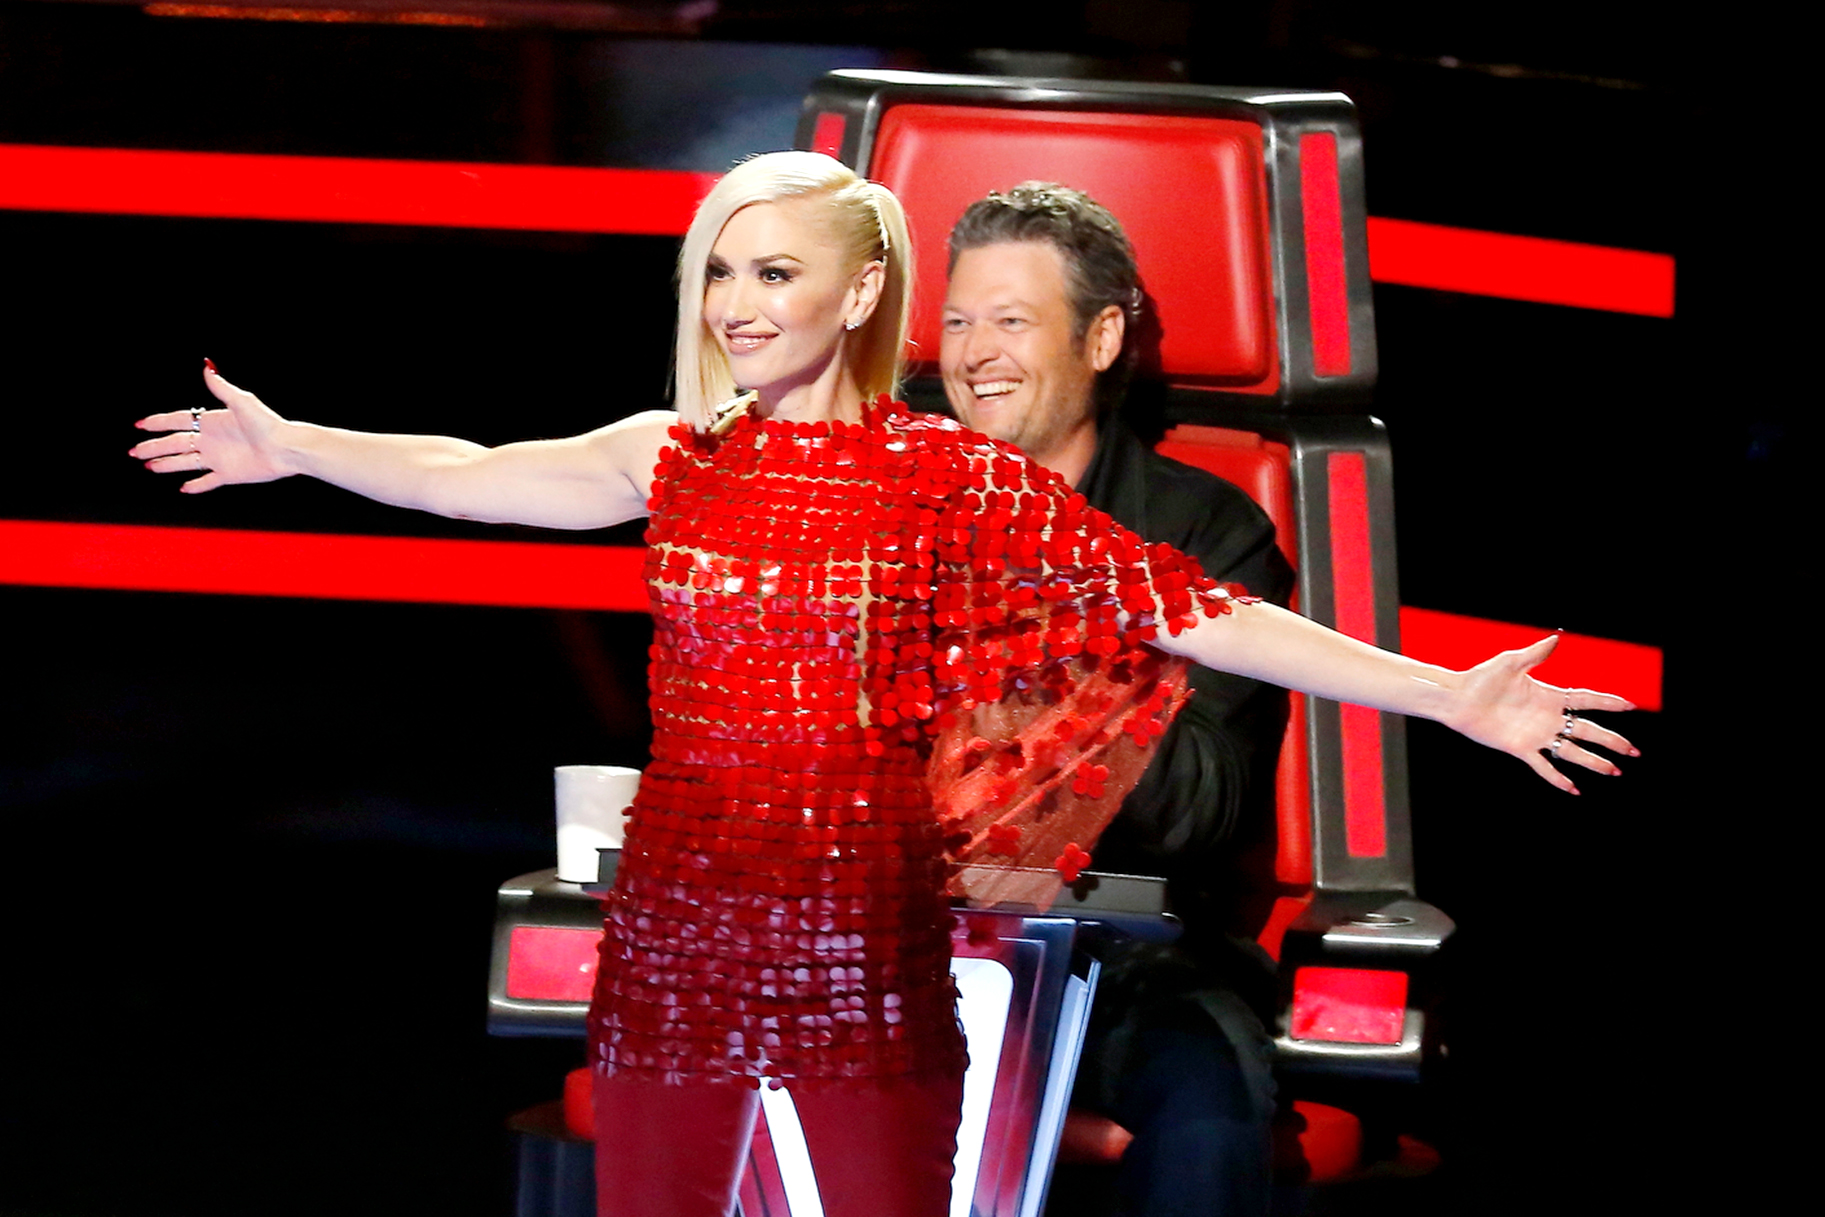 Gwen Stefani and Blake Shelton on The Voice in 2015